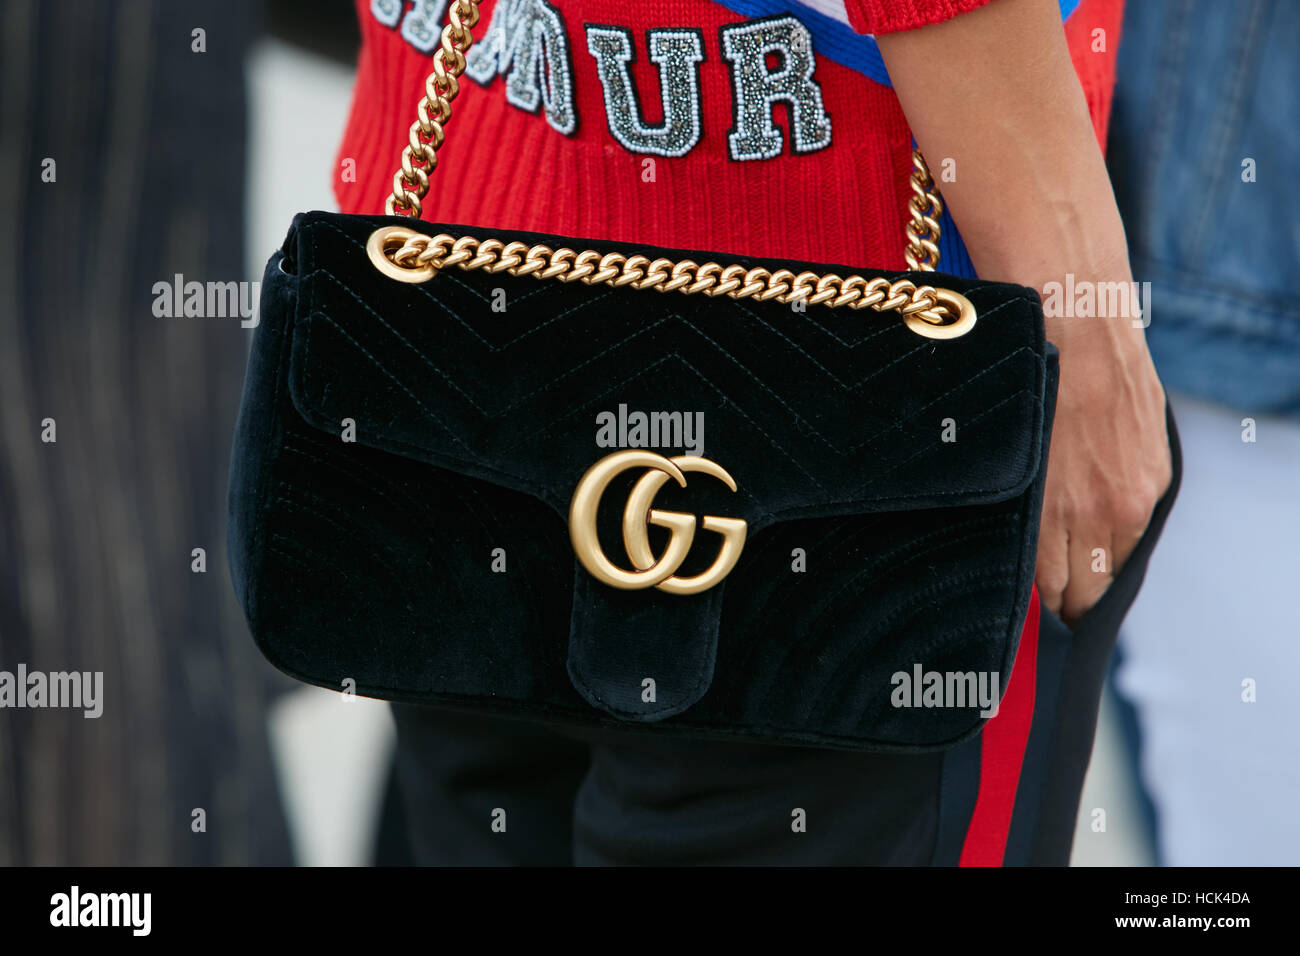 How To Tell If A Gucci Bag Is Real? | myGemma